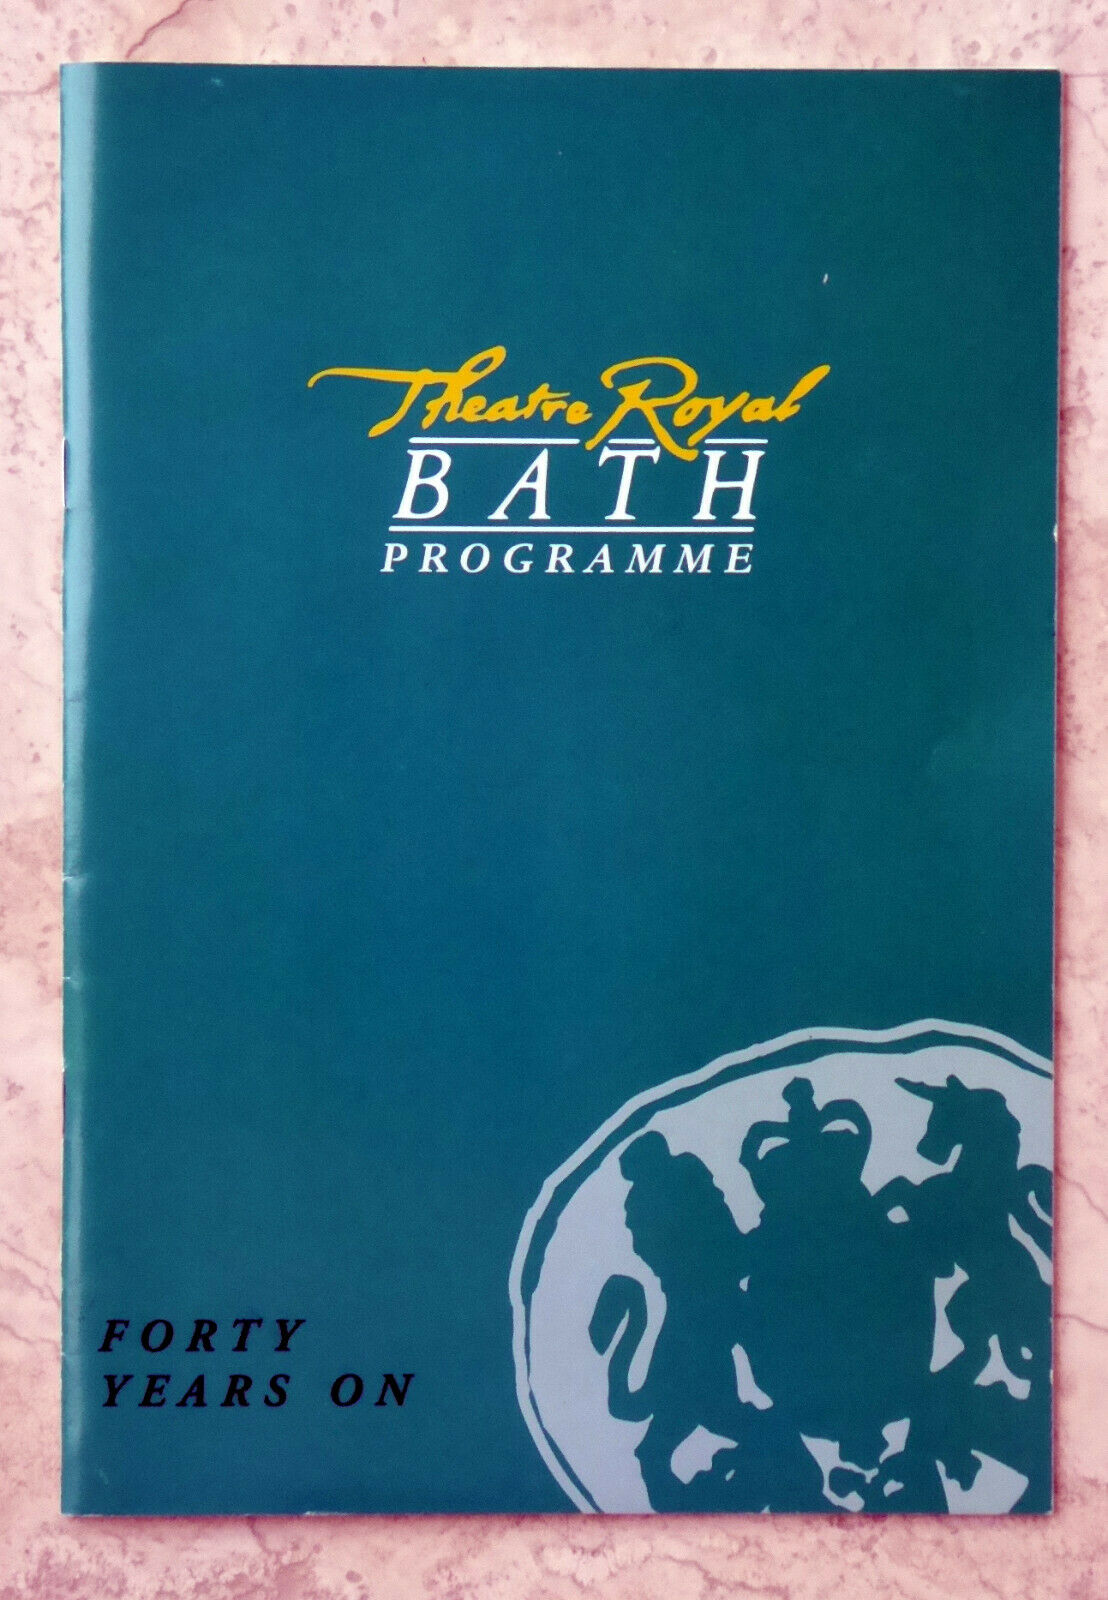 Theatre Royal Bath Programme "forty Years On"